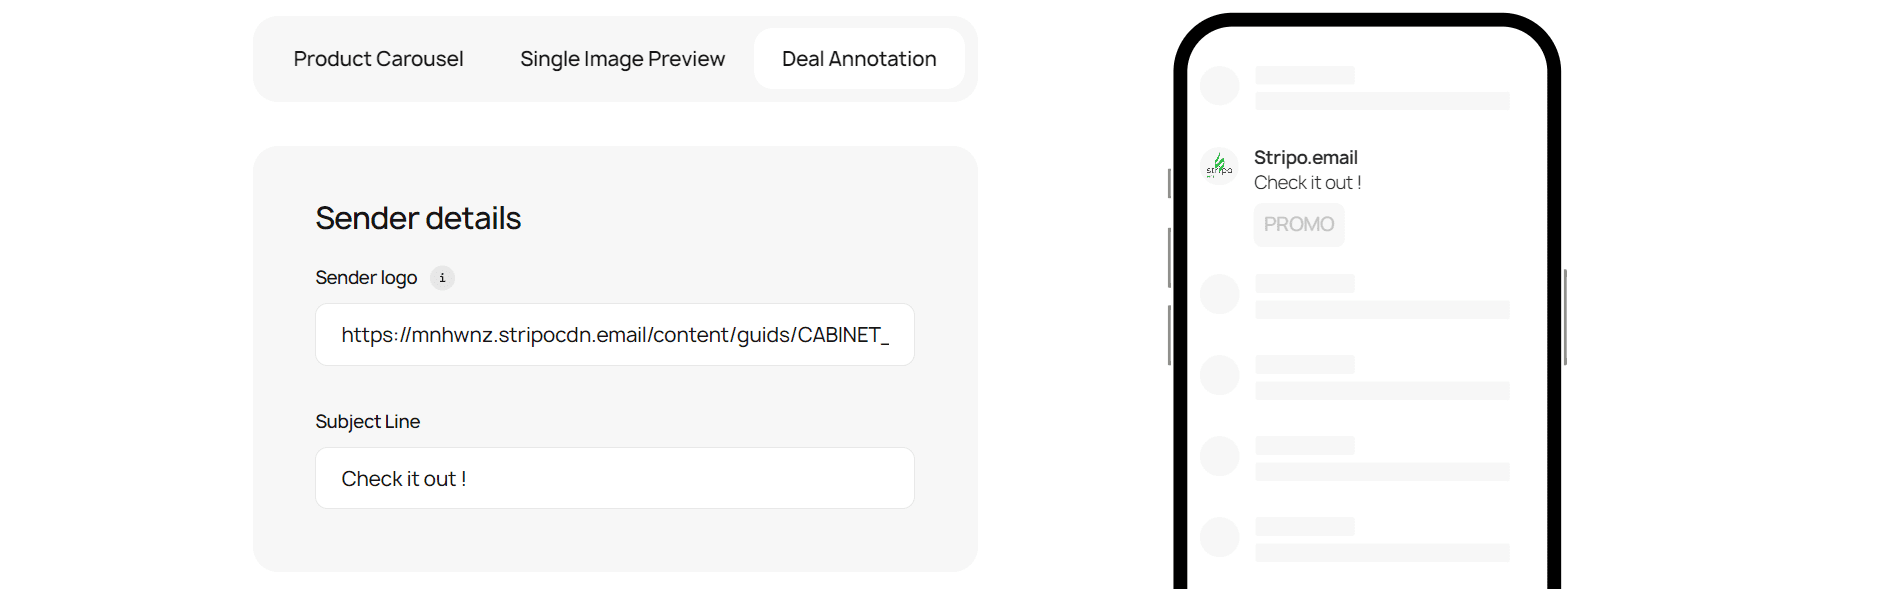 Deal annotation example